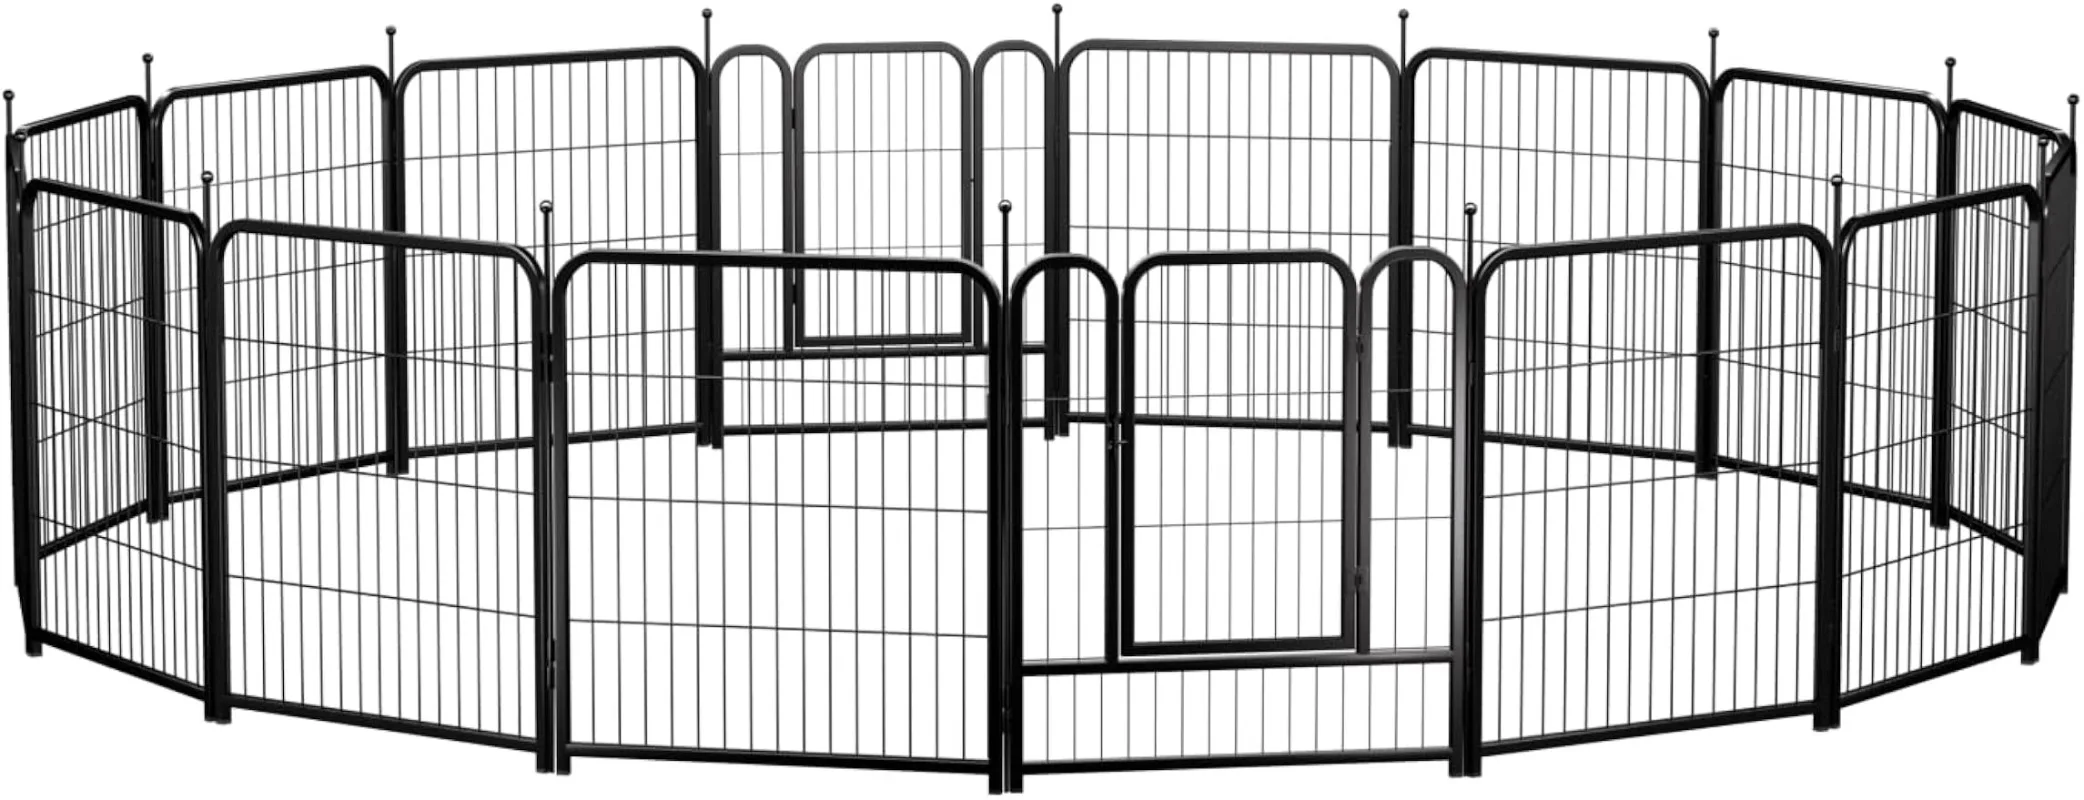 

PawGiant Dog Fence Playpen Indoor Outdoor，Metal Pet Puppy Cat Exercise Fencing Gate Crate Cage Outside RV, Camping, Yard, Garden